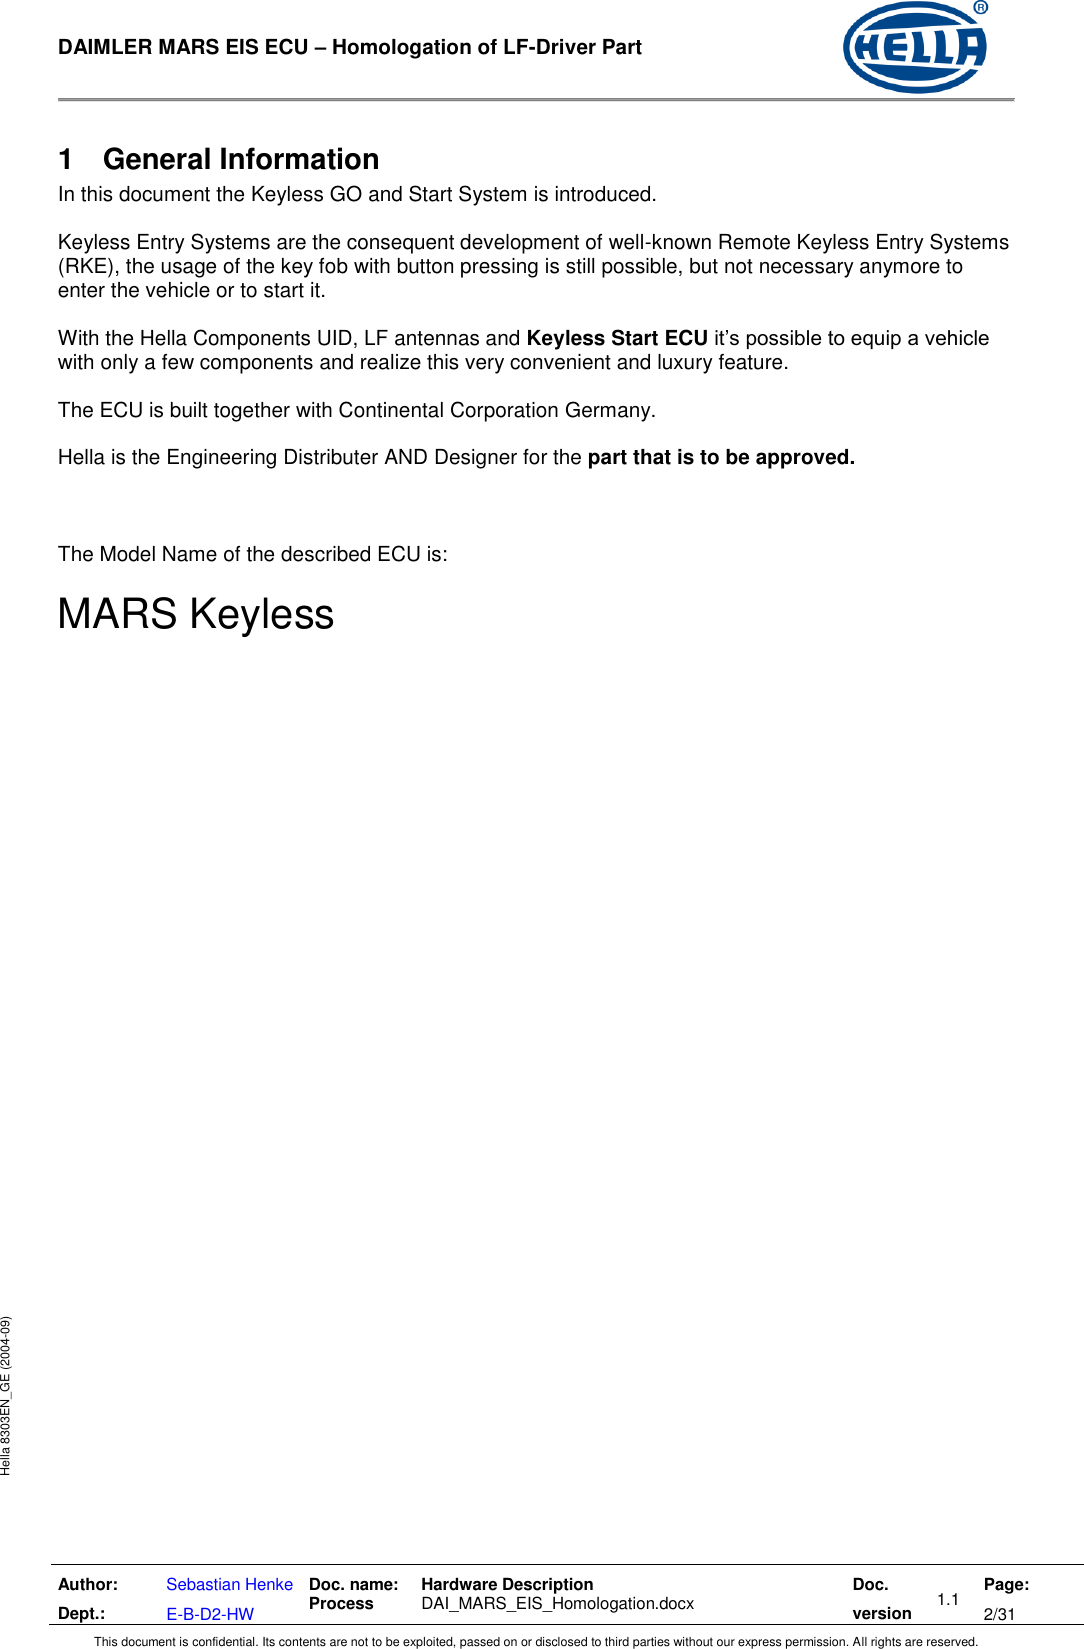  DAIMLER MARS EIS ECU – Homologation of LF-Driver Part   Author: Dept.: Sebastian Henke E-B-D2-HW Doc. name: Process Hardware Description  DAI_MARS_EIS_Homologation.docx Doc. version 1.1 Page: 2/31 This document is confidential. Its contents are not to be exploited, passed on or disclosed to third parties without our express permission. All rights are reserved. Hella 8303EN_GE (2004-09) 1  General Information In this document the Keyless GO and Start System is introduced.  Keyless Entry Systems are the consequent development of well-known Remote Keyless Entry Systems (RKE), the usage of the key fob with button pressing is still possible, but not necessary anymore to enter the vehicle or to start it.  With the Hella Components UID, LF antennas and Keyless Start ECU it’s possible to equip a vehicle with only a few components and realize this very convenient and luxury feature.  The ECU is built together with Continental Corporation Germany.  Hella is the Engineering Distributer AND Designer for the part that is to be approved.    The Model Name of the described ECU is:  MARS Keyless   